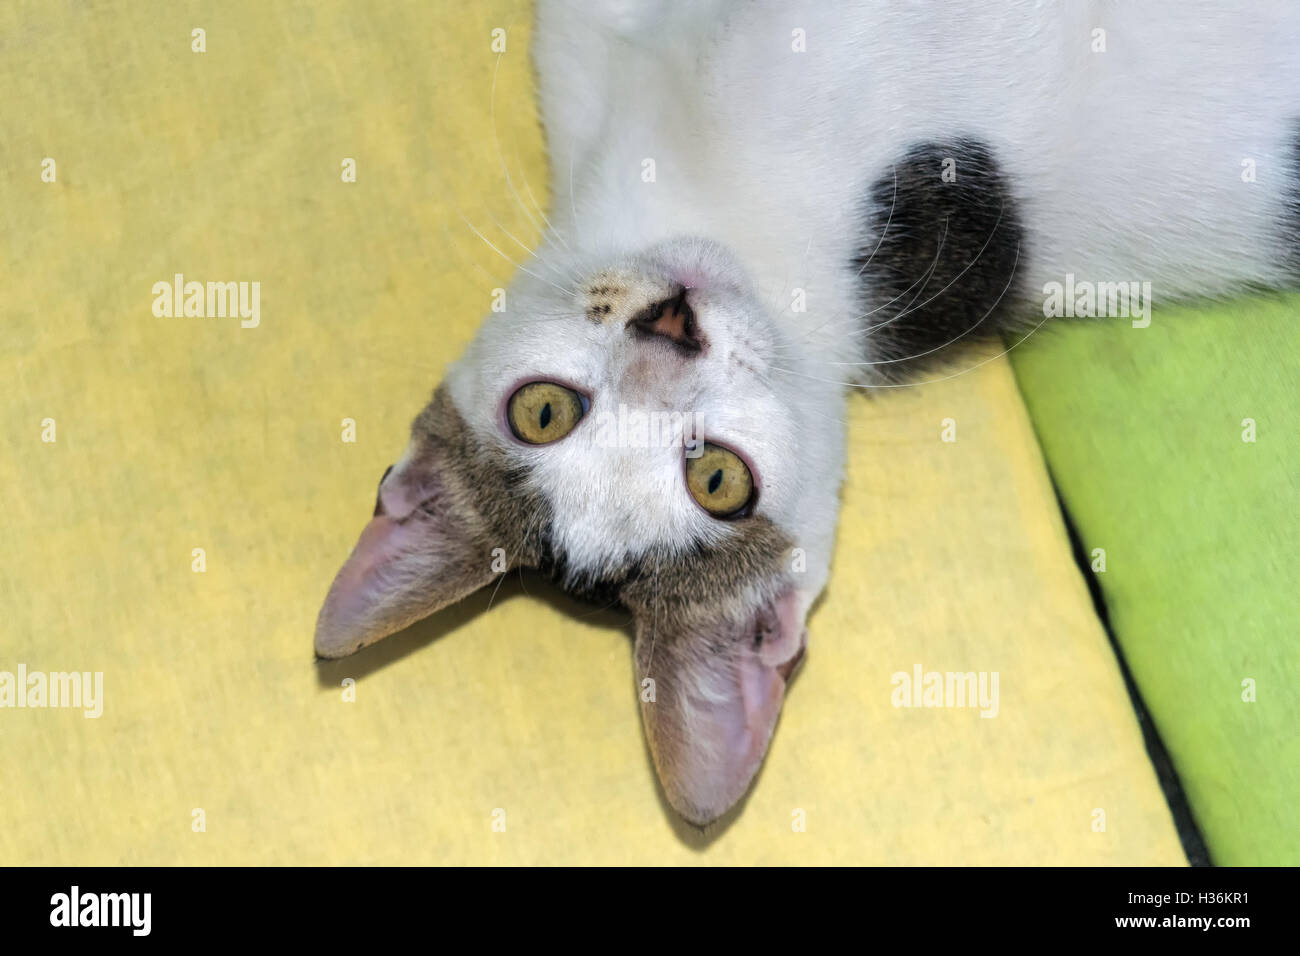 Funny pose of cat on a yellow and a green pillow looking backwards at the camera. Stock Photo